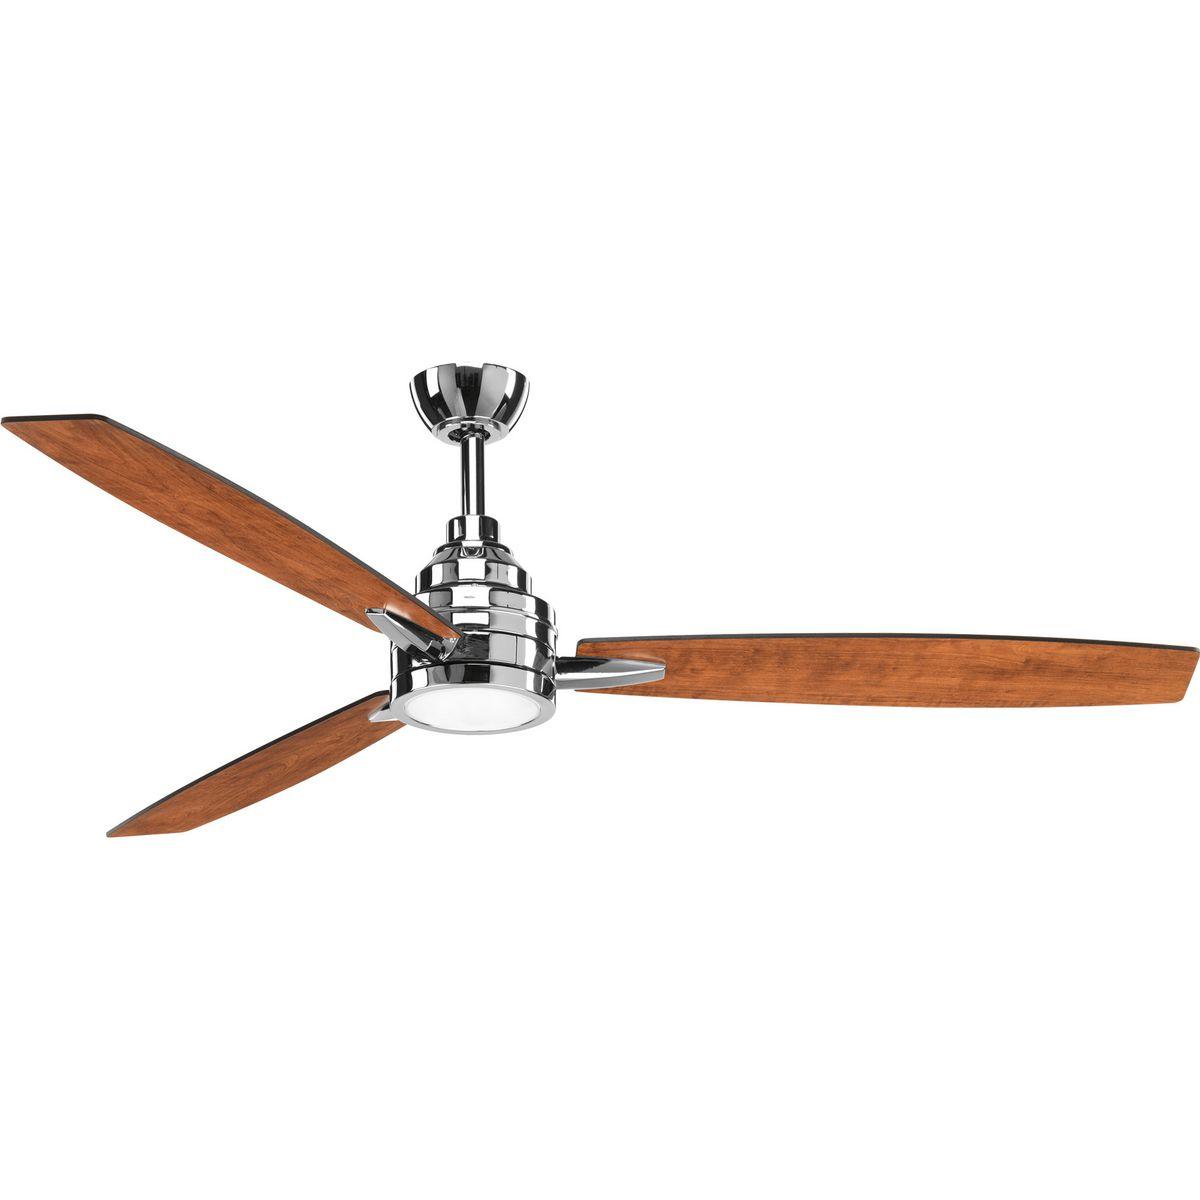 Hubbell P2554-1530K Three-blade 60 inch Gaze ceiling fan features an LED light source, offering both form and function with energy- and cost-savings benefits. An opal white shade contains an 18W dimmable, 3000K LED module. Full range dimming and remote control with batteries